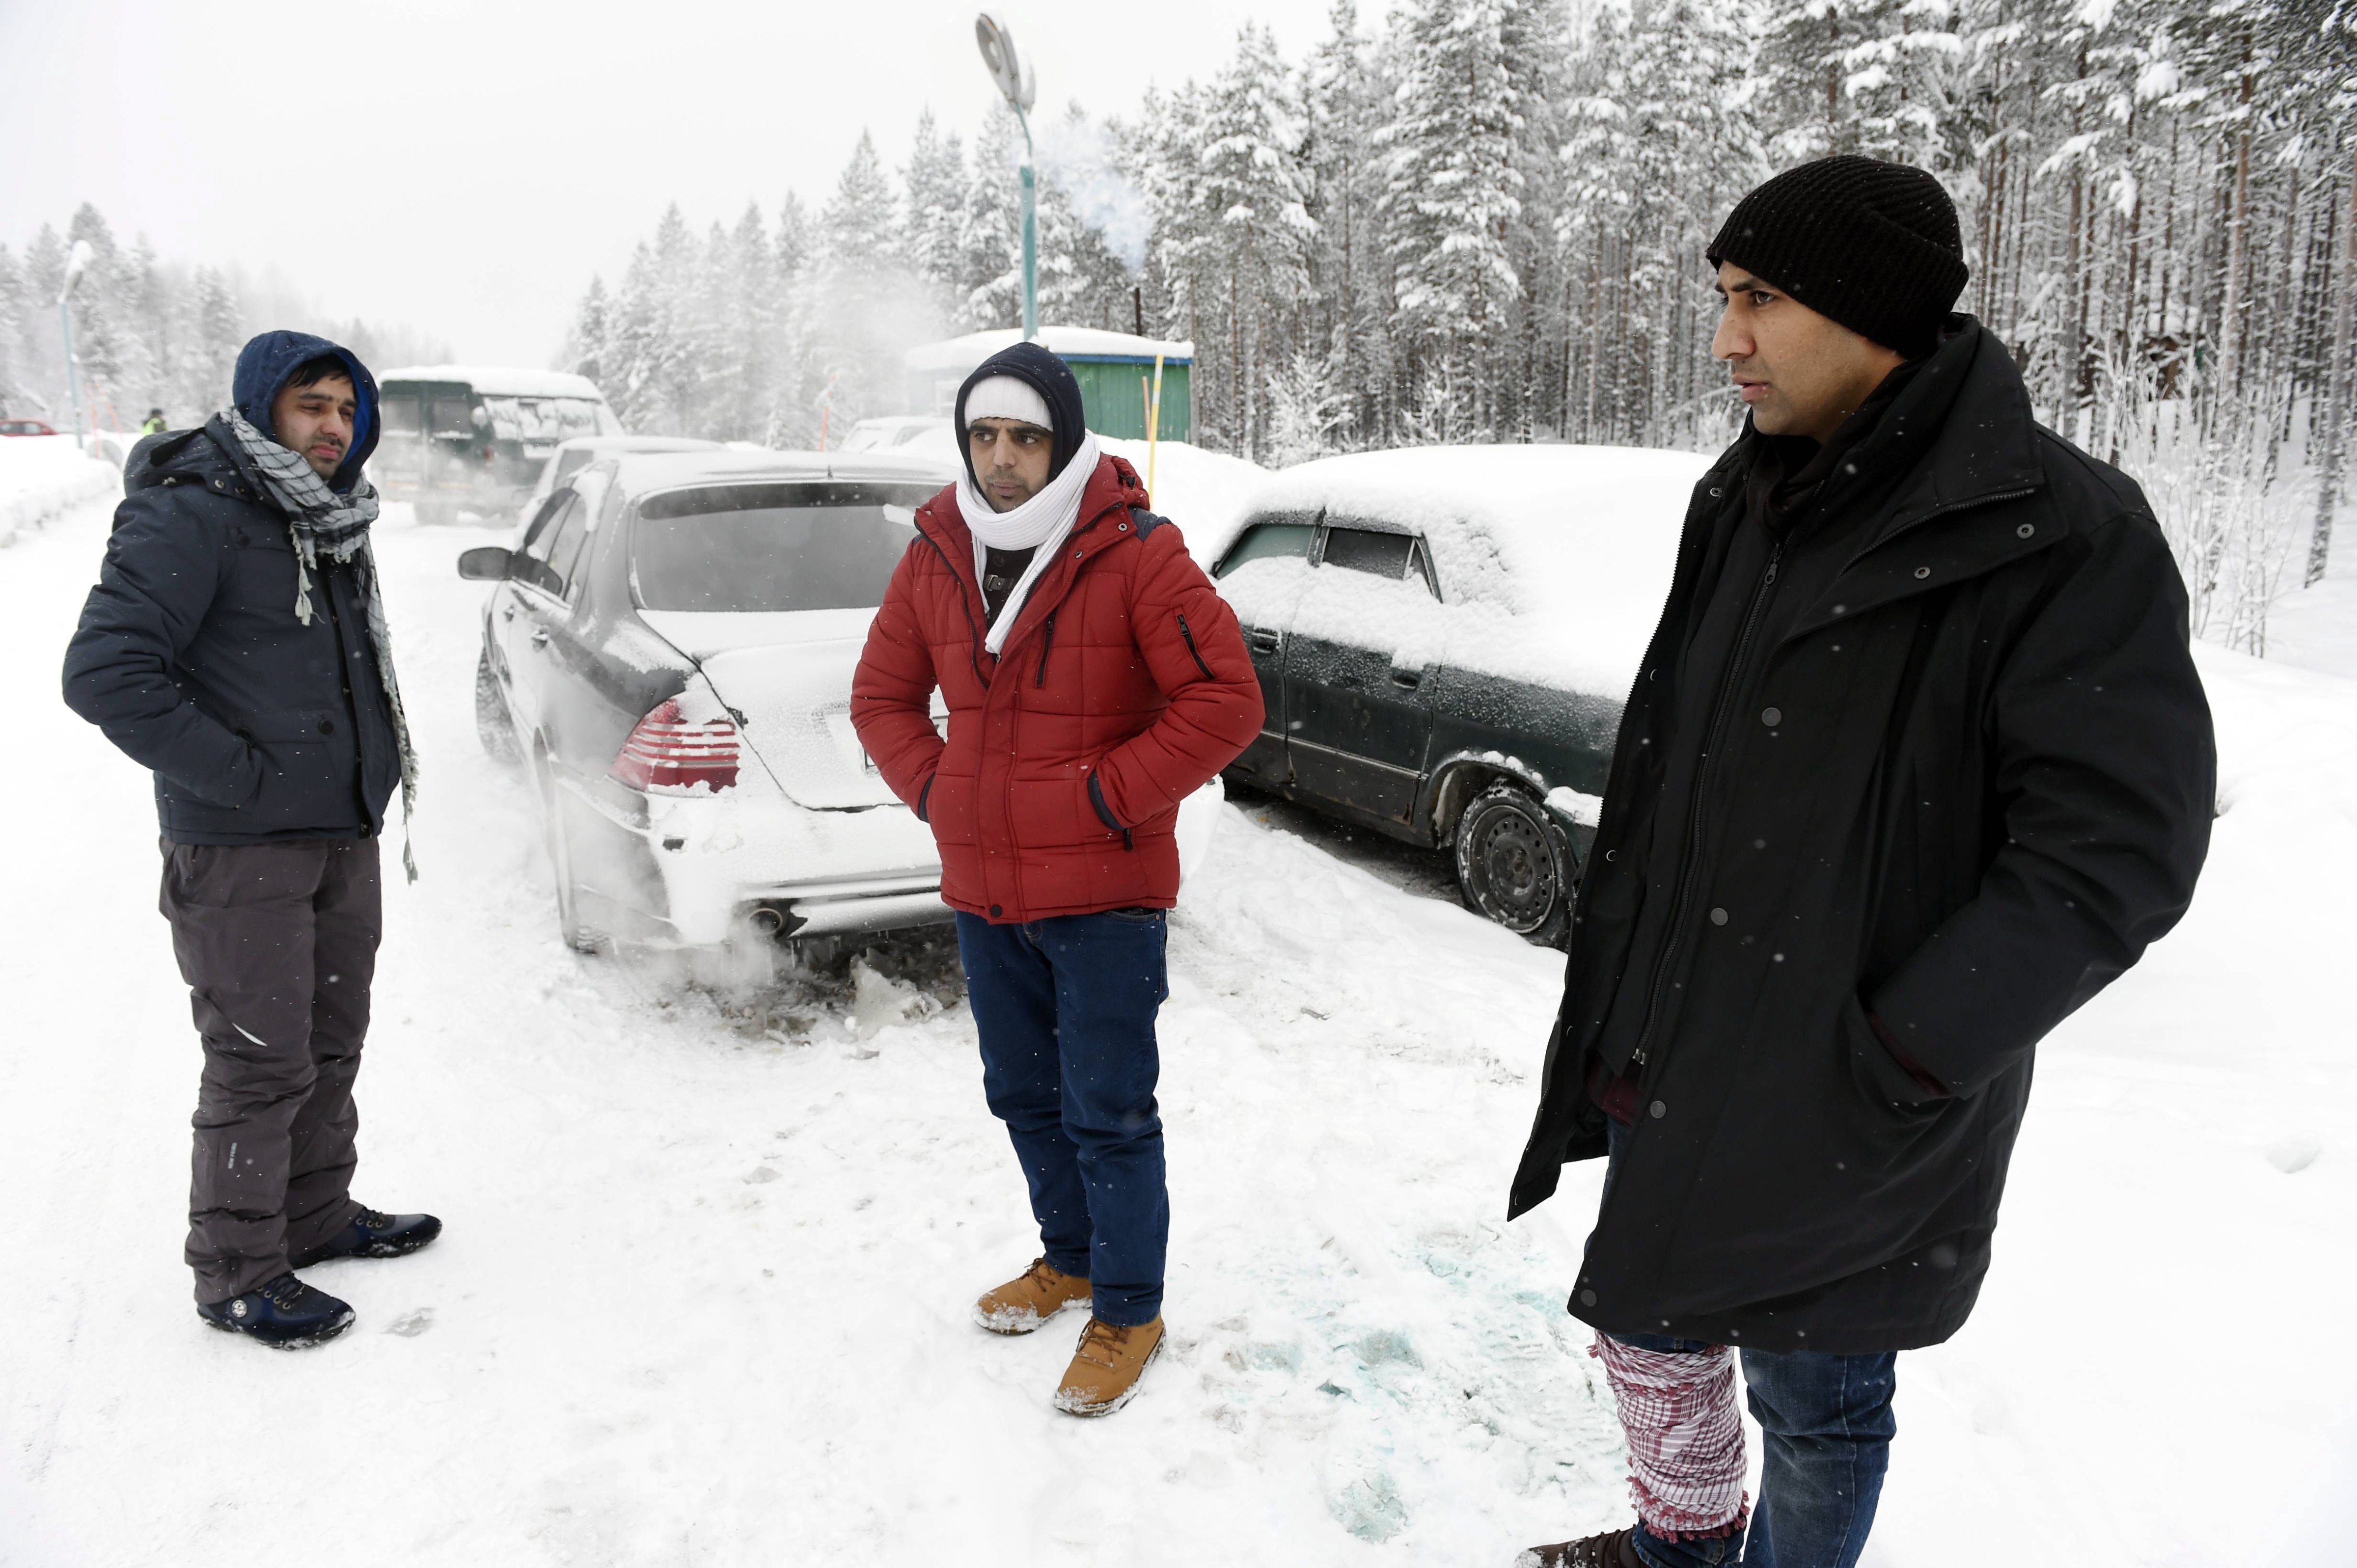 Asylum seekers Rahmatullah, left, and Nazirulhag, center, from Afghanistan and Fida Hussain from Pakistan wait on the Russian side of the border on Jan. 23, 2016 (Jussi Nukari—AFP/Getty Images)